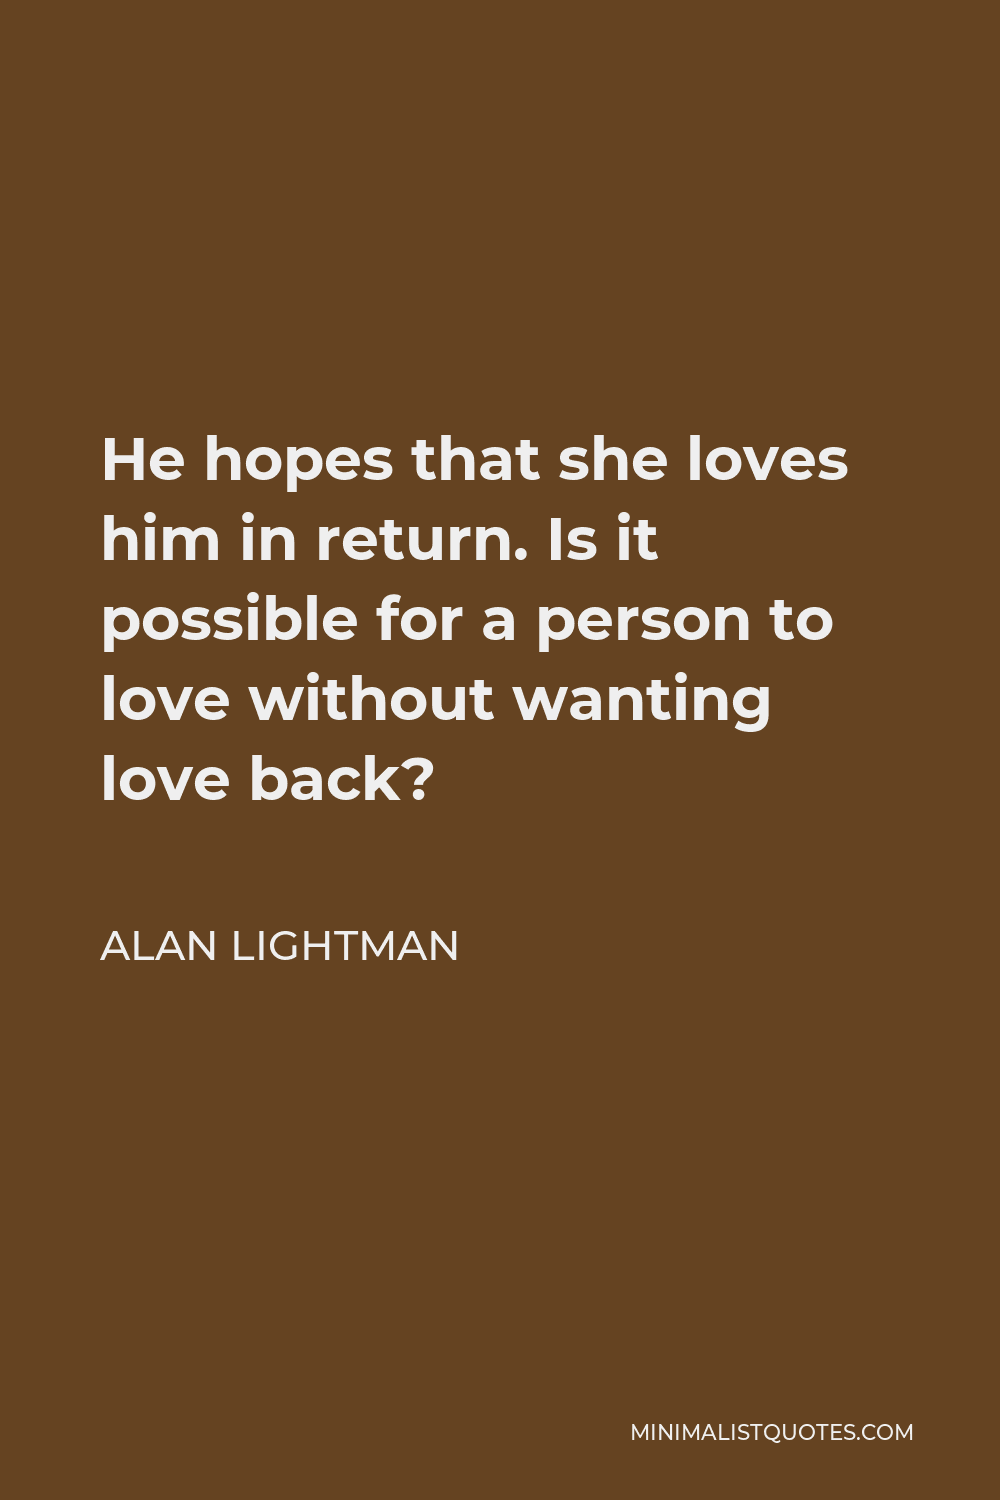 Alan Lightman Quote - He hopes that she loves him in return. Is it possible for a person to love without wanting love back?